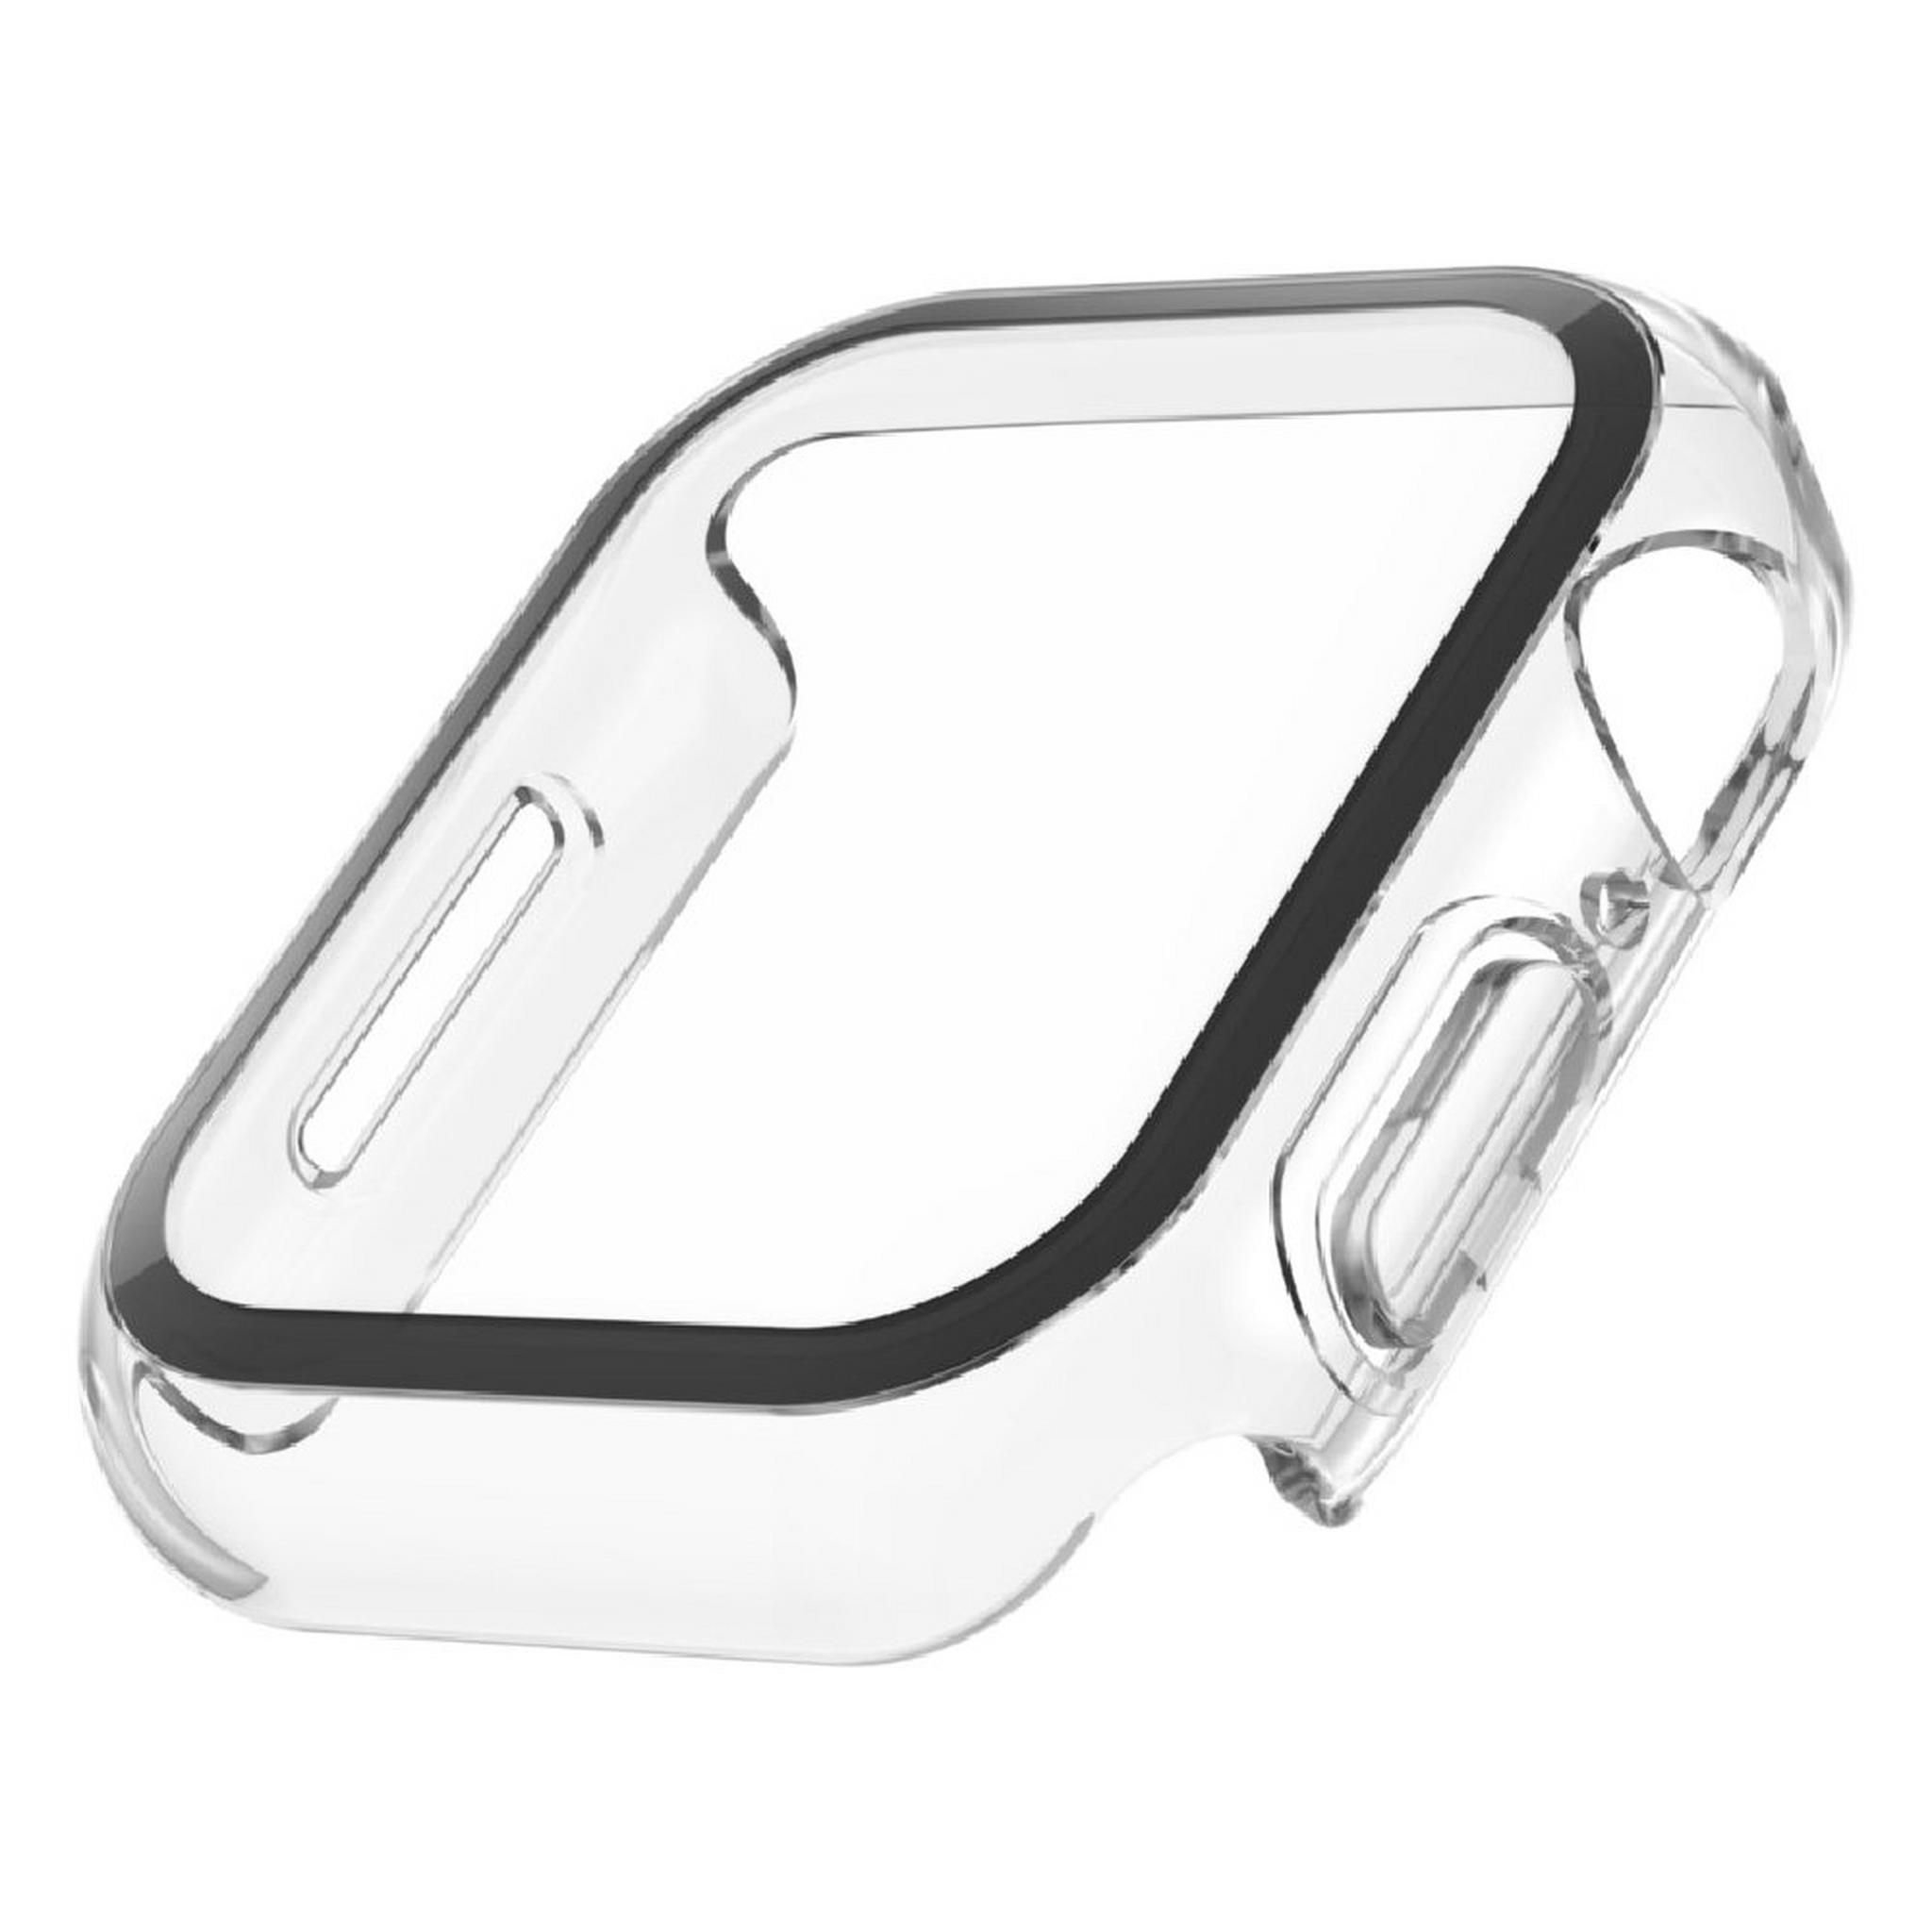 Belkin Apple Watch 45mm Tempered Glass Screen Protector - Clear